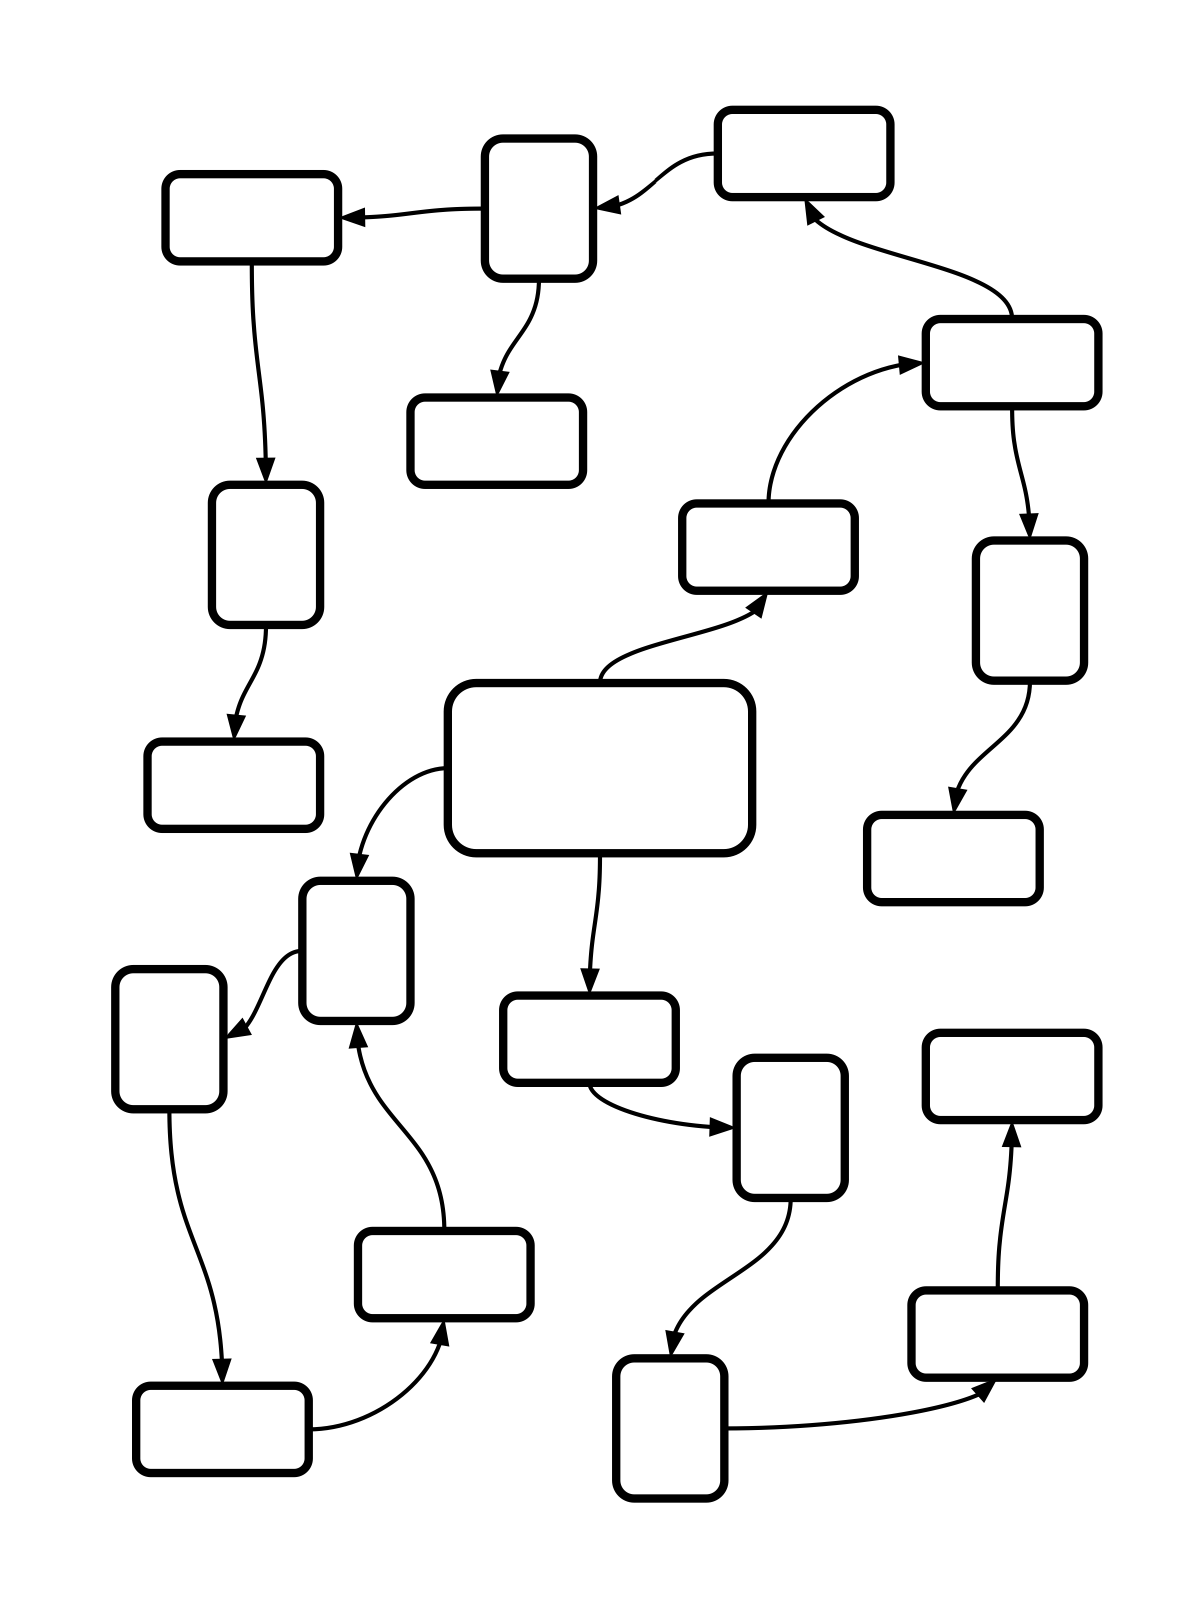 Abstract representation of synthesis map.